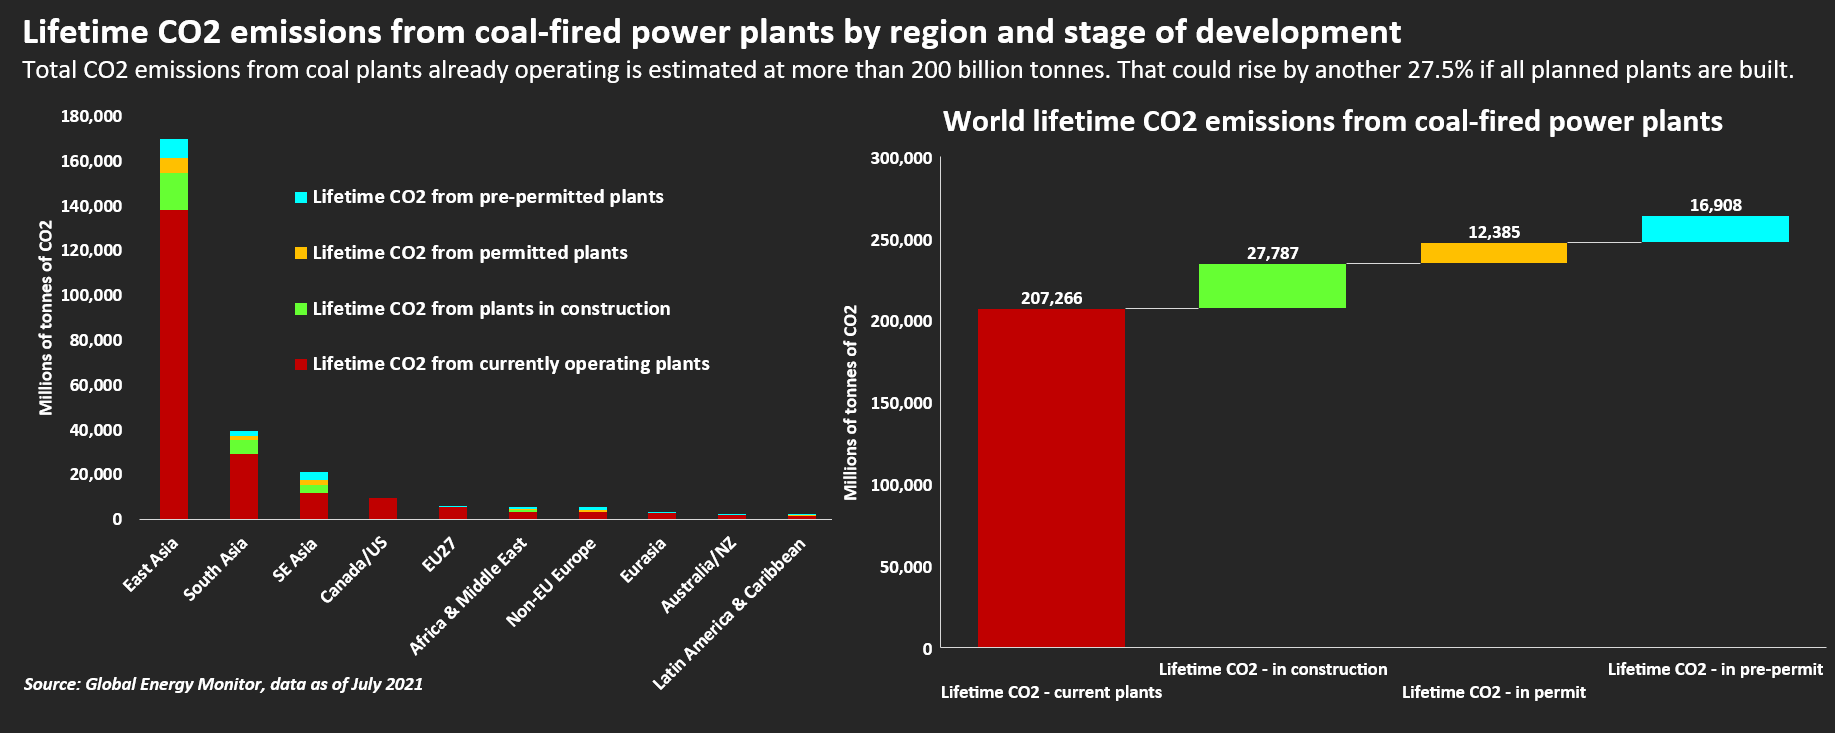 Lifetime CO2 emissions from coal-fired power plants by region and stage of development